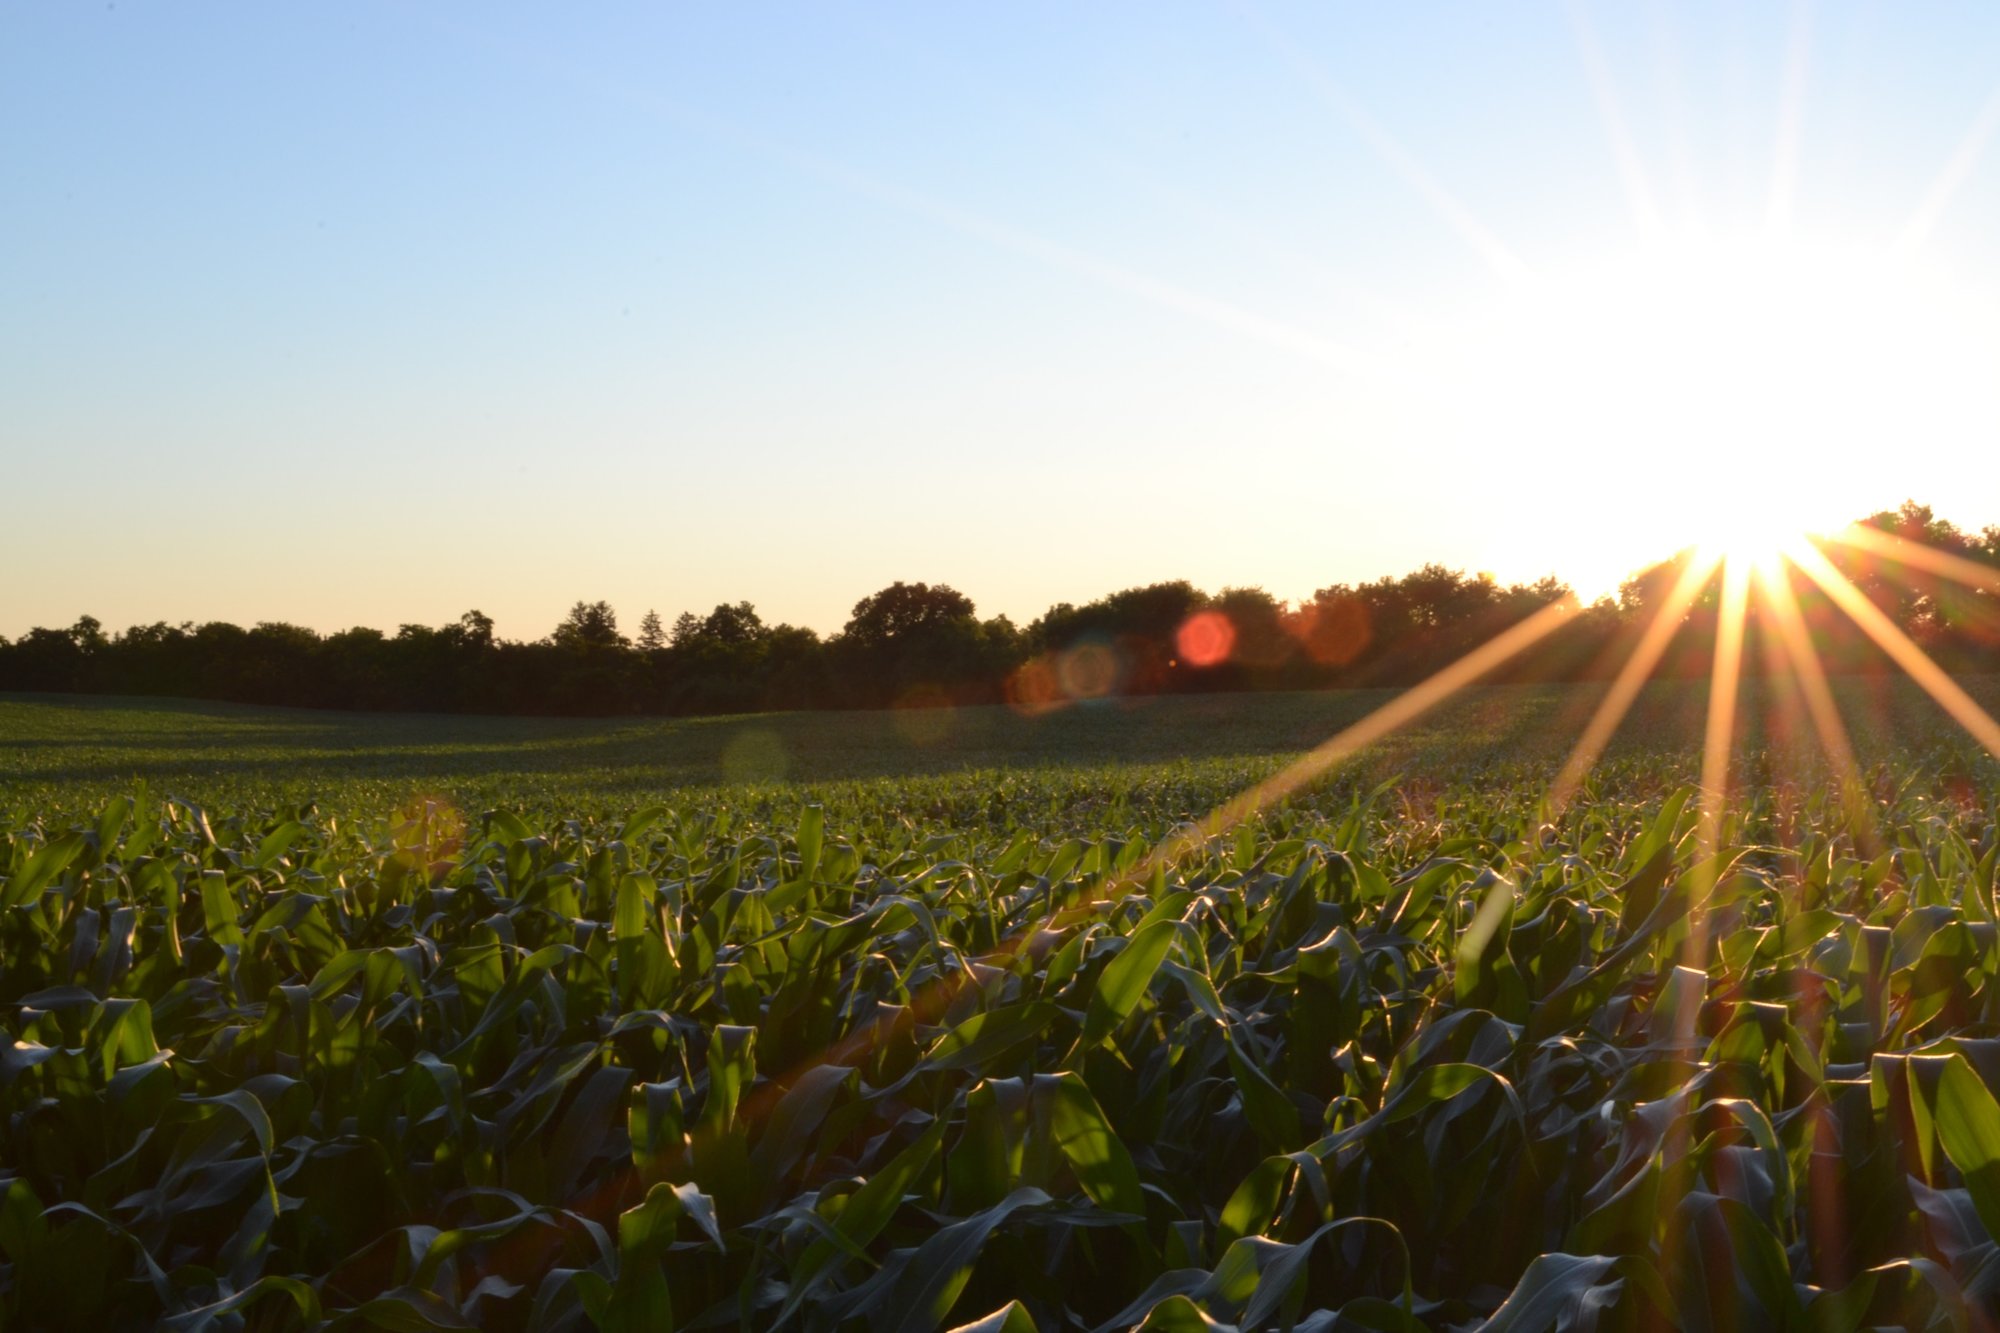 A sun setting behind a crop field with rays protruding out over the crop rows